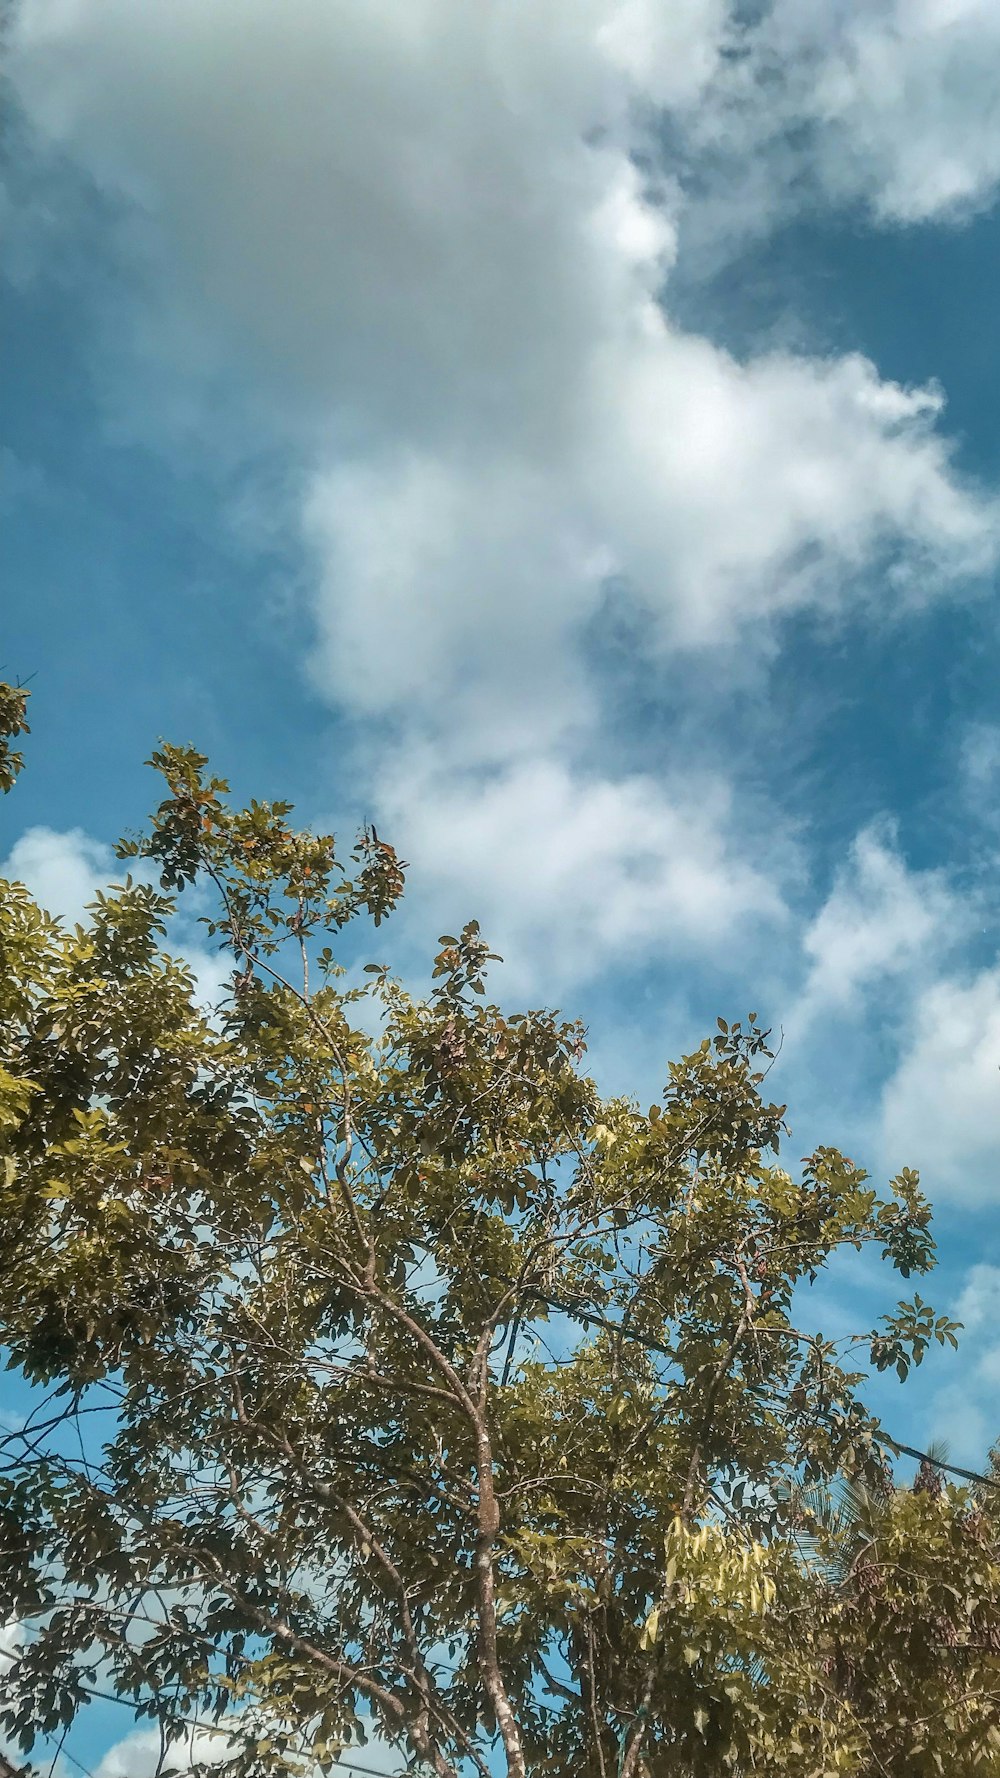 green tree under blue sky and white clouds during daytime